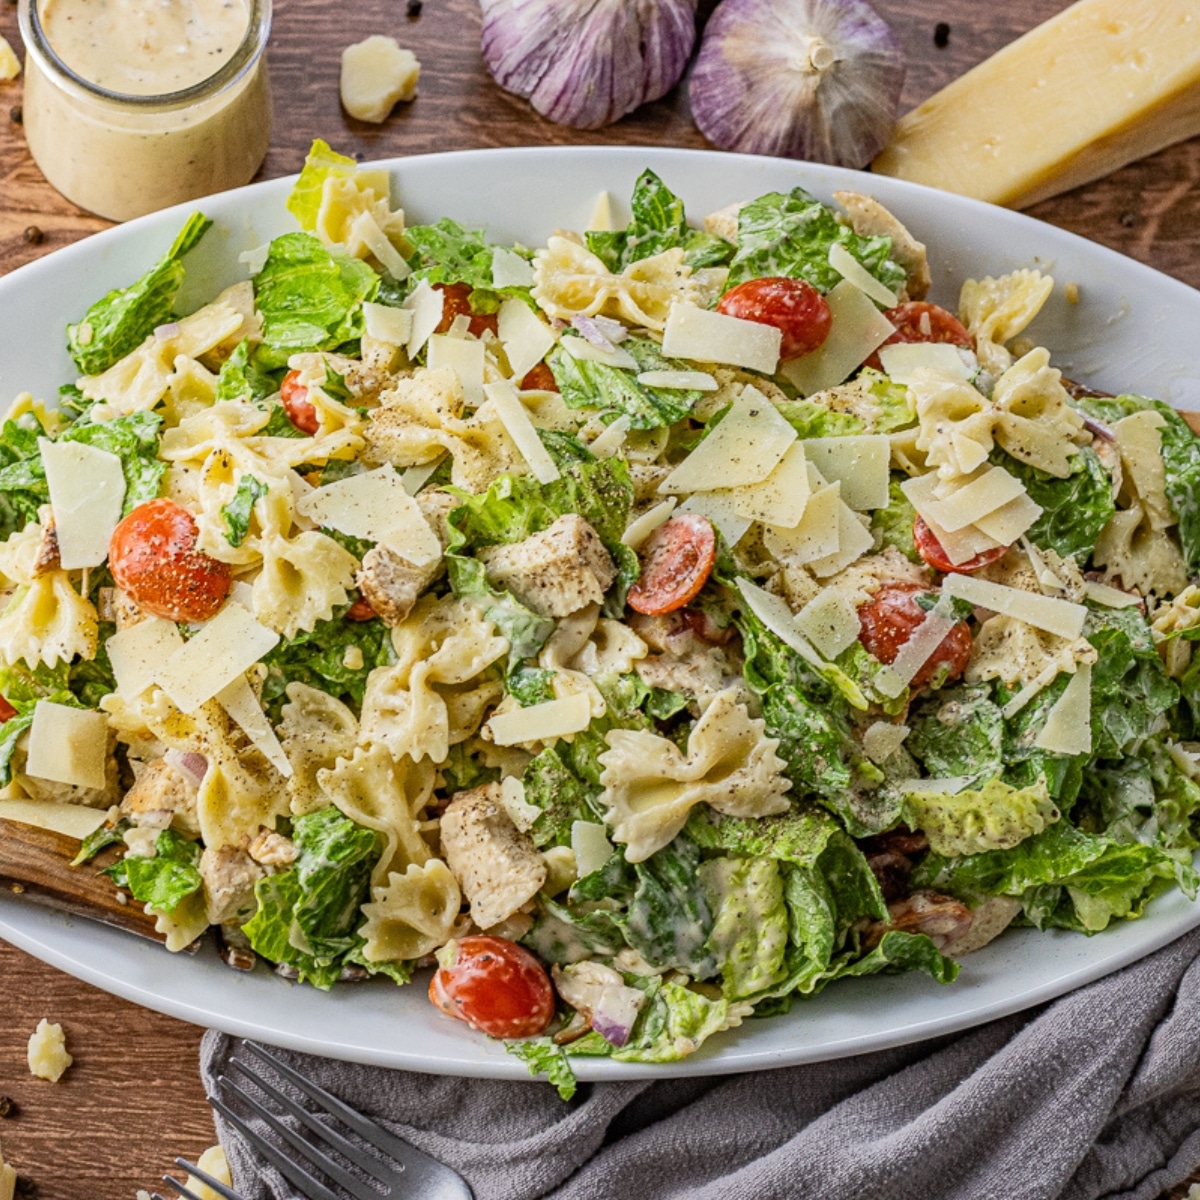 salad made with chicken, romaine lettuce, parmesan, tomatoes and bowtie pasta